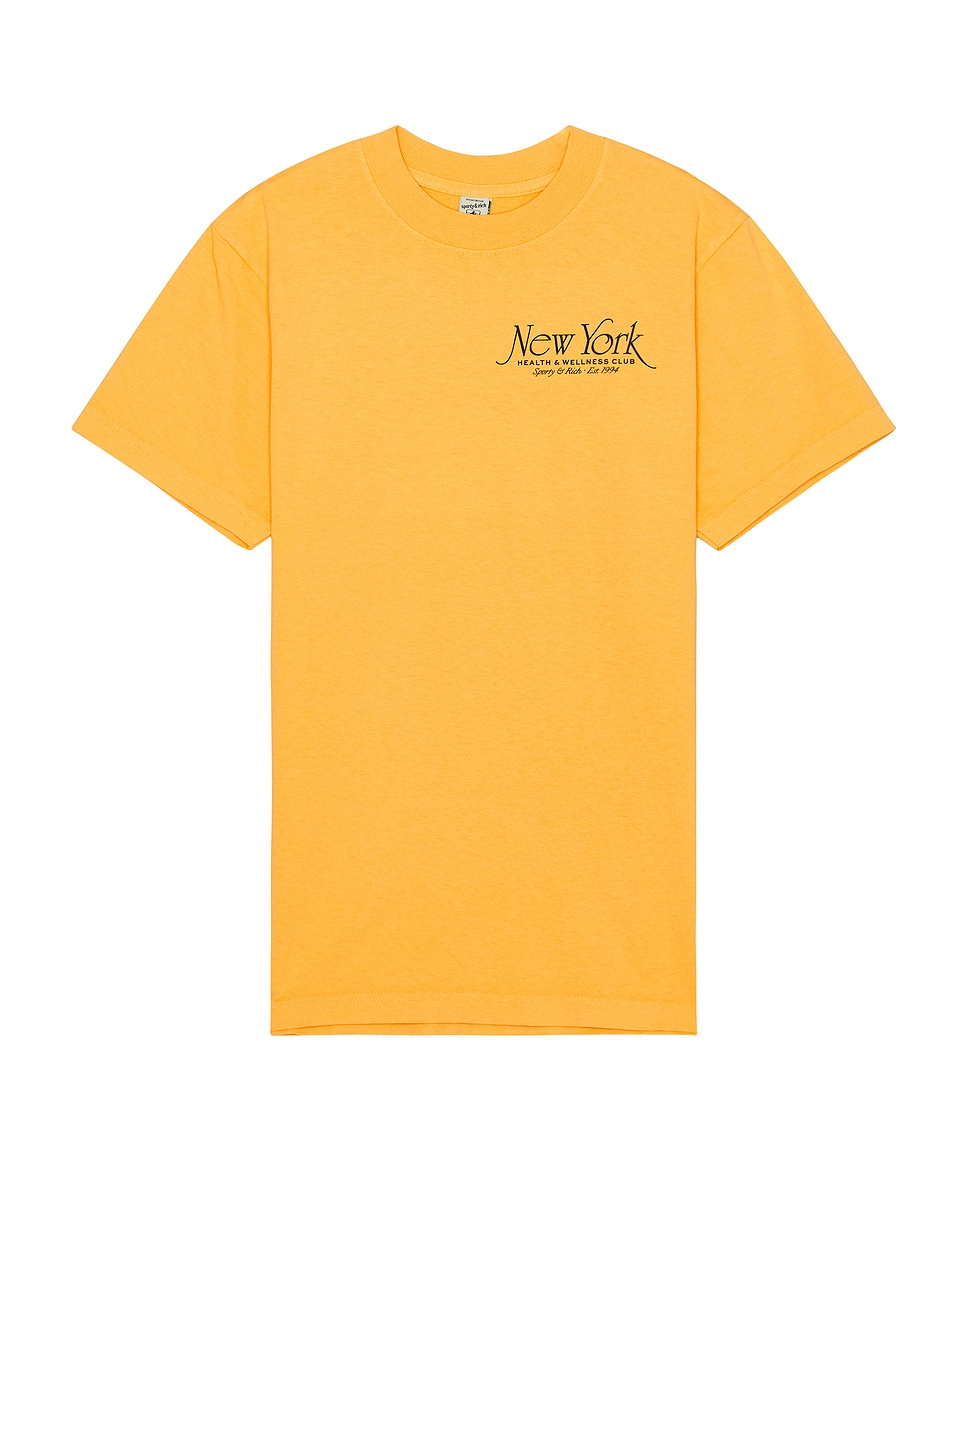 Image 1 of Sporty & Rich Ny 94 T-shirt in Faded Gold